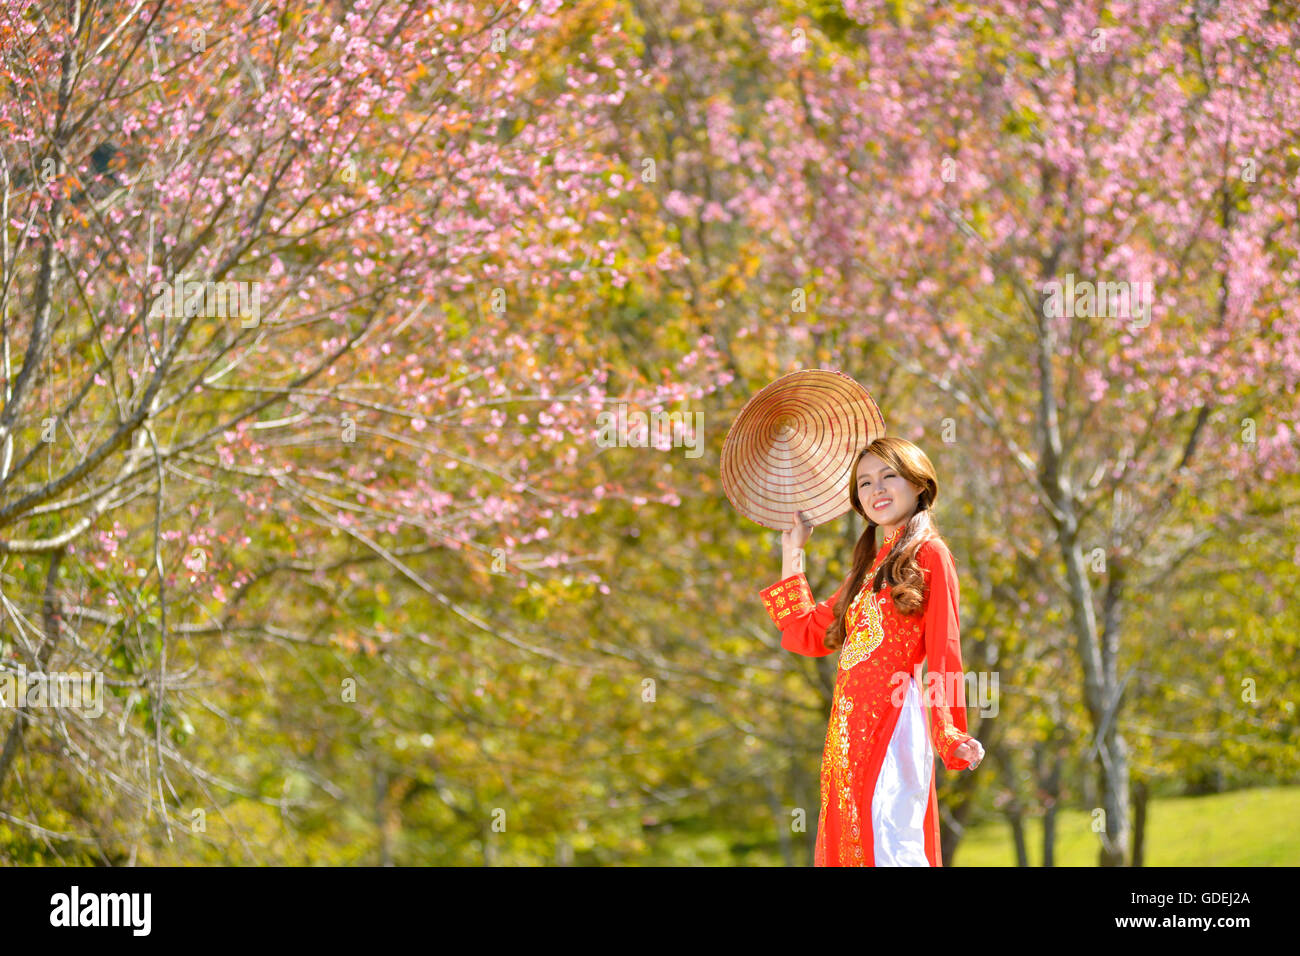 Smiling Woman standing in cherry blossom orchard wearing traditional Chinese clothing Stock Photo